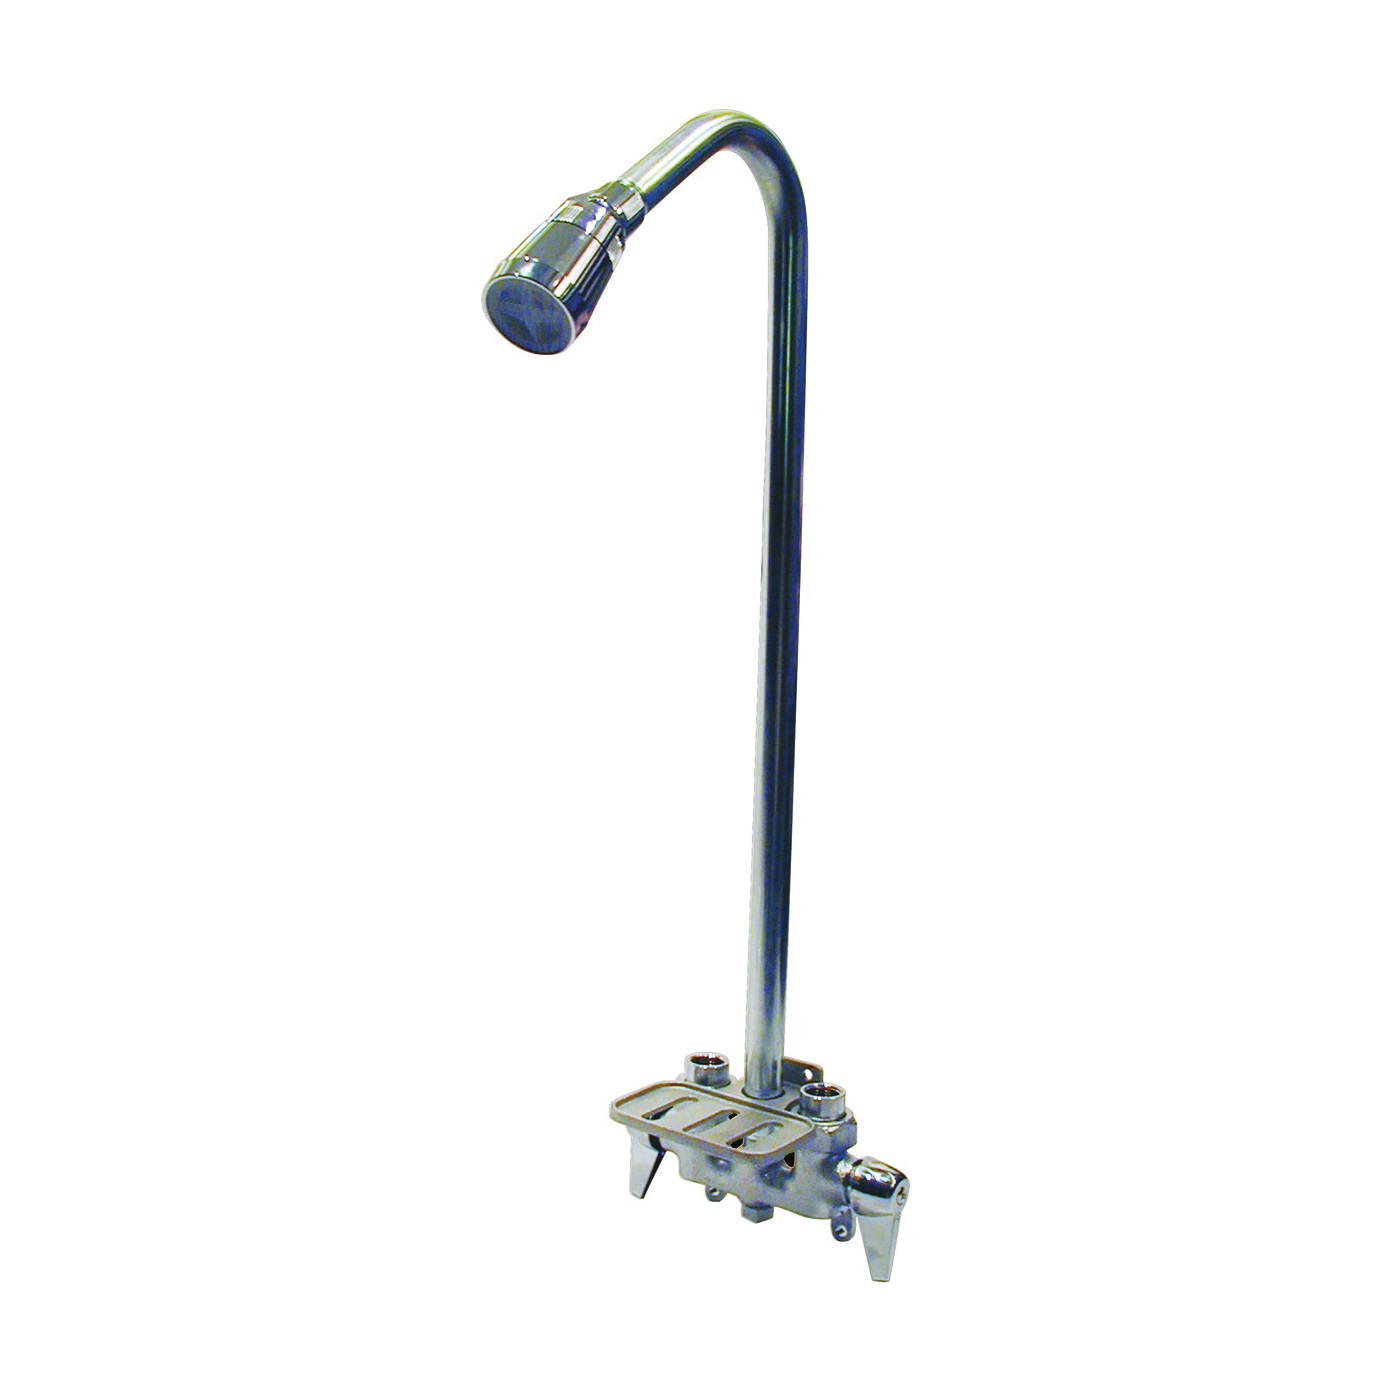 126-015 Utility Shower Faucet, 2.5 gpm, Brass